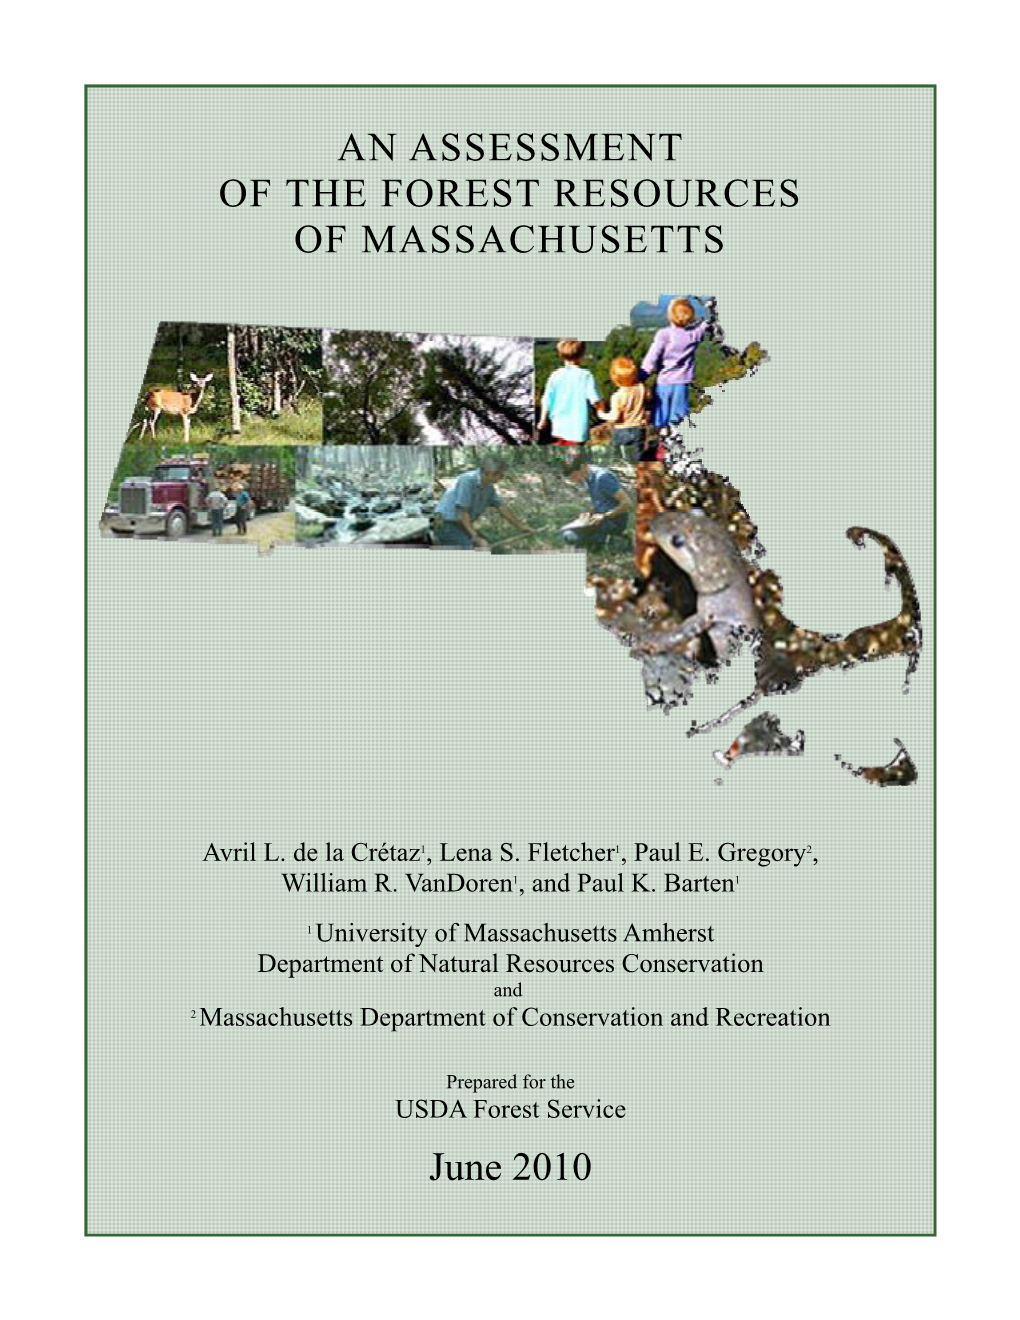 An Assessment of the Forest Resources of Massachusetts